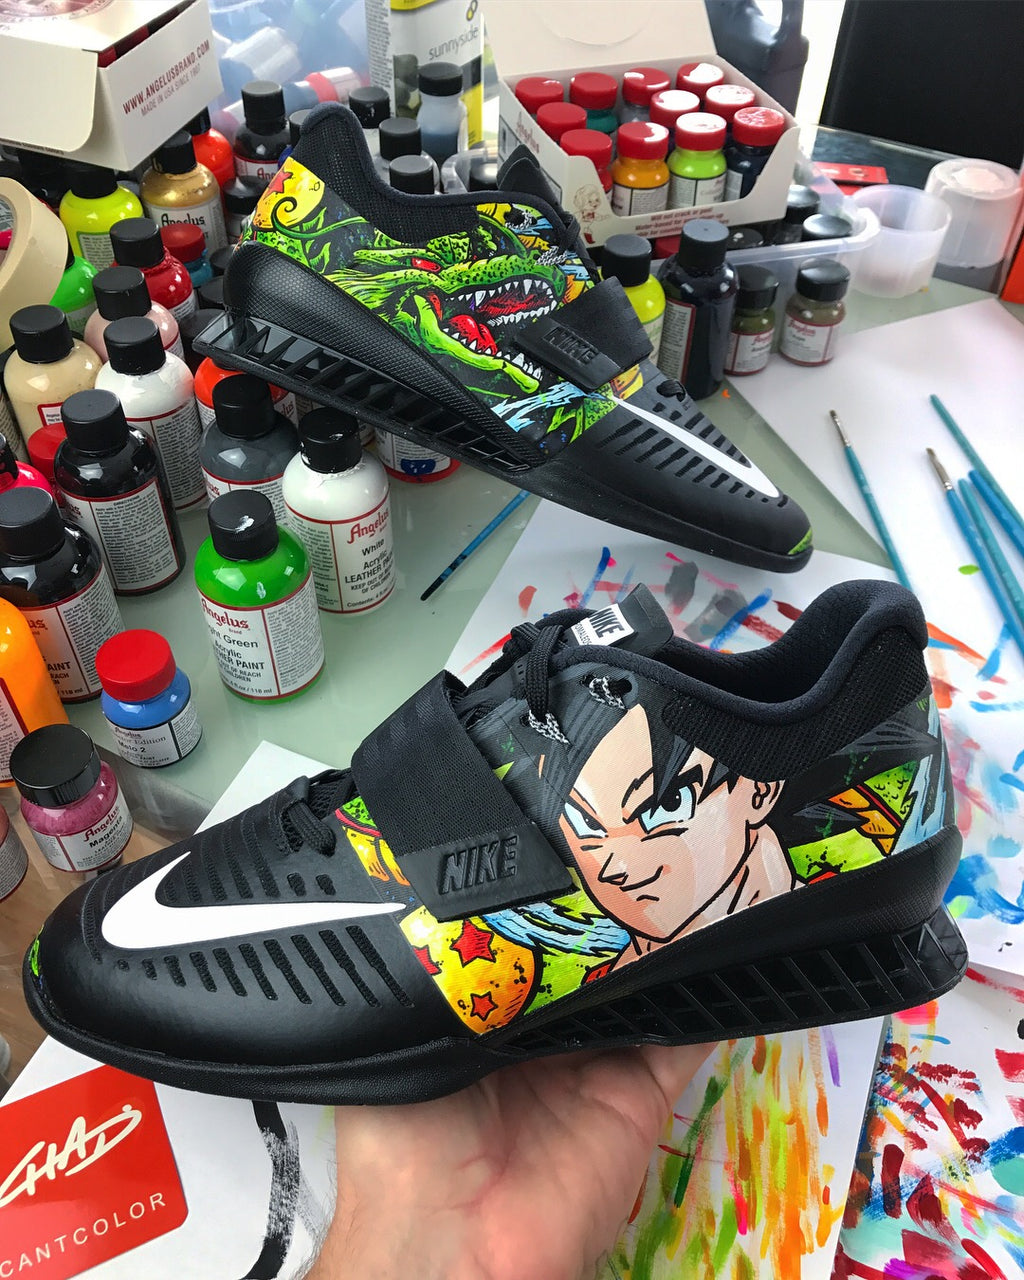 DBZ Hand painted Nike Romaleos 3 olympic weightlifting crossfit shoes